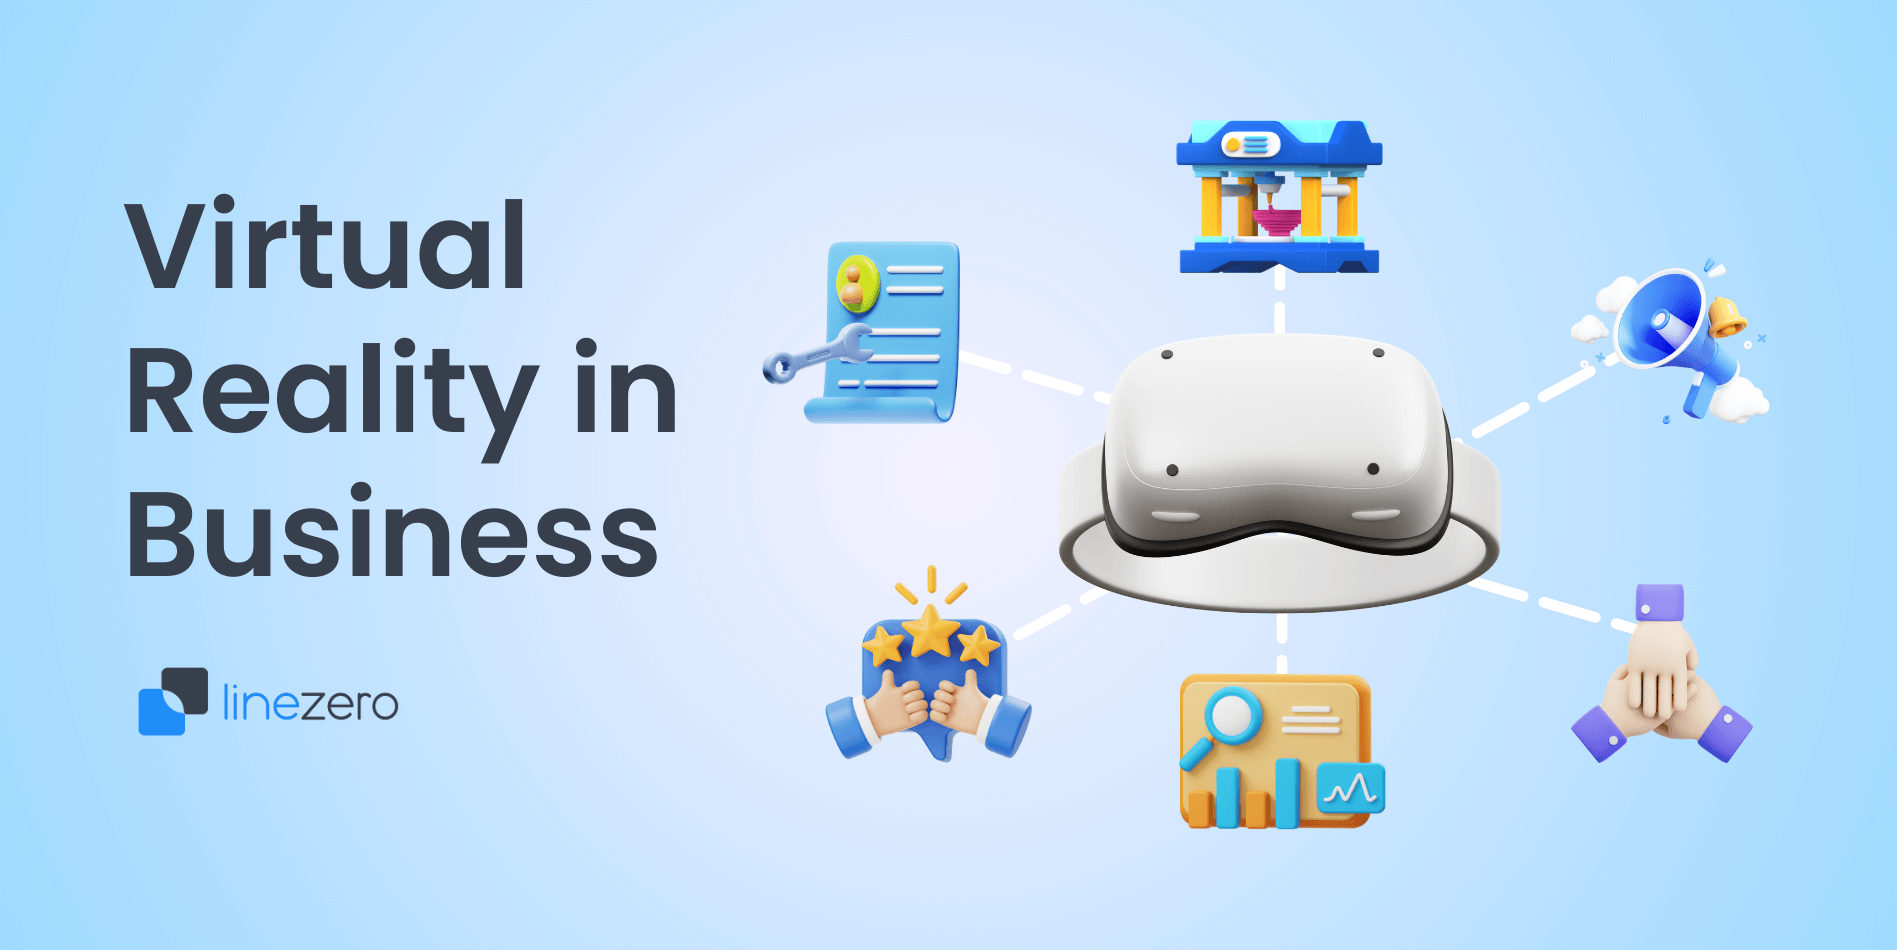 VR in Business graphic VR quest device